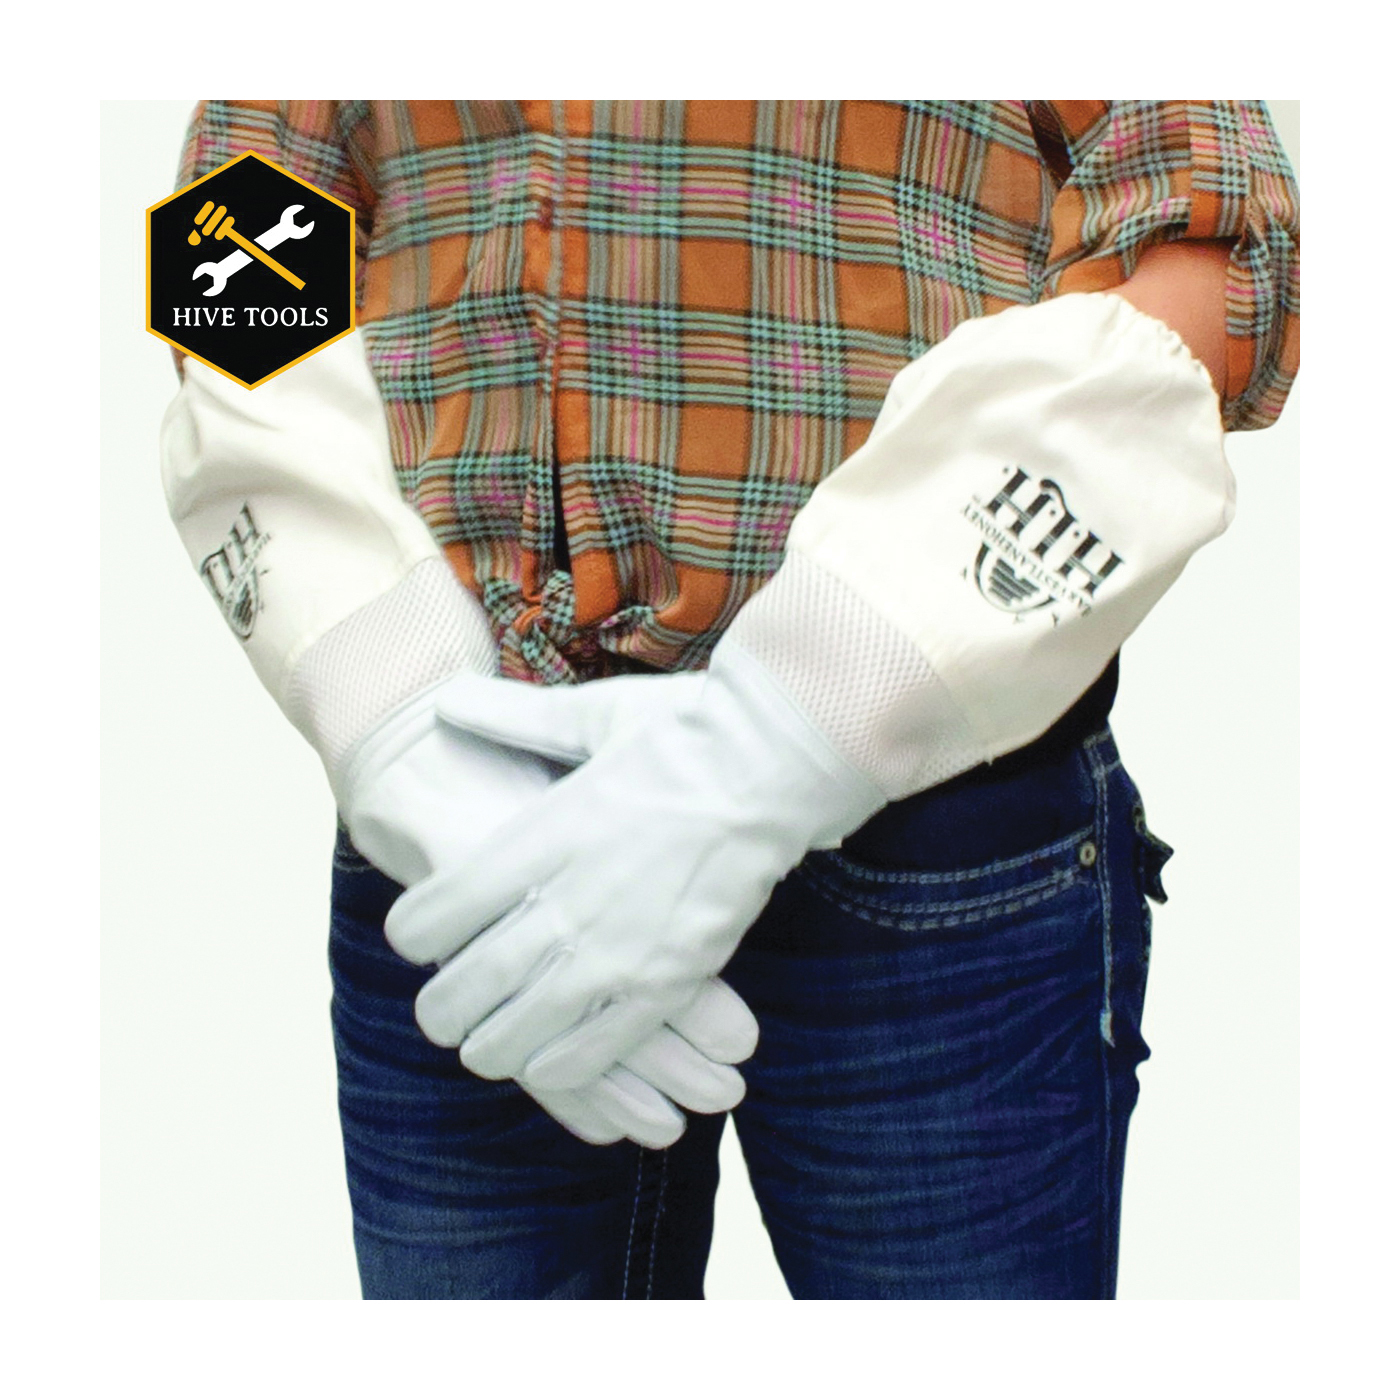 CLOTHGS-103 Beekeeping Gloves, S, Goatskin Leather